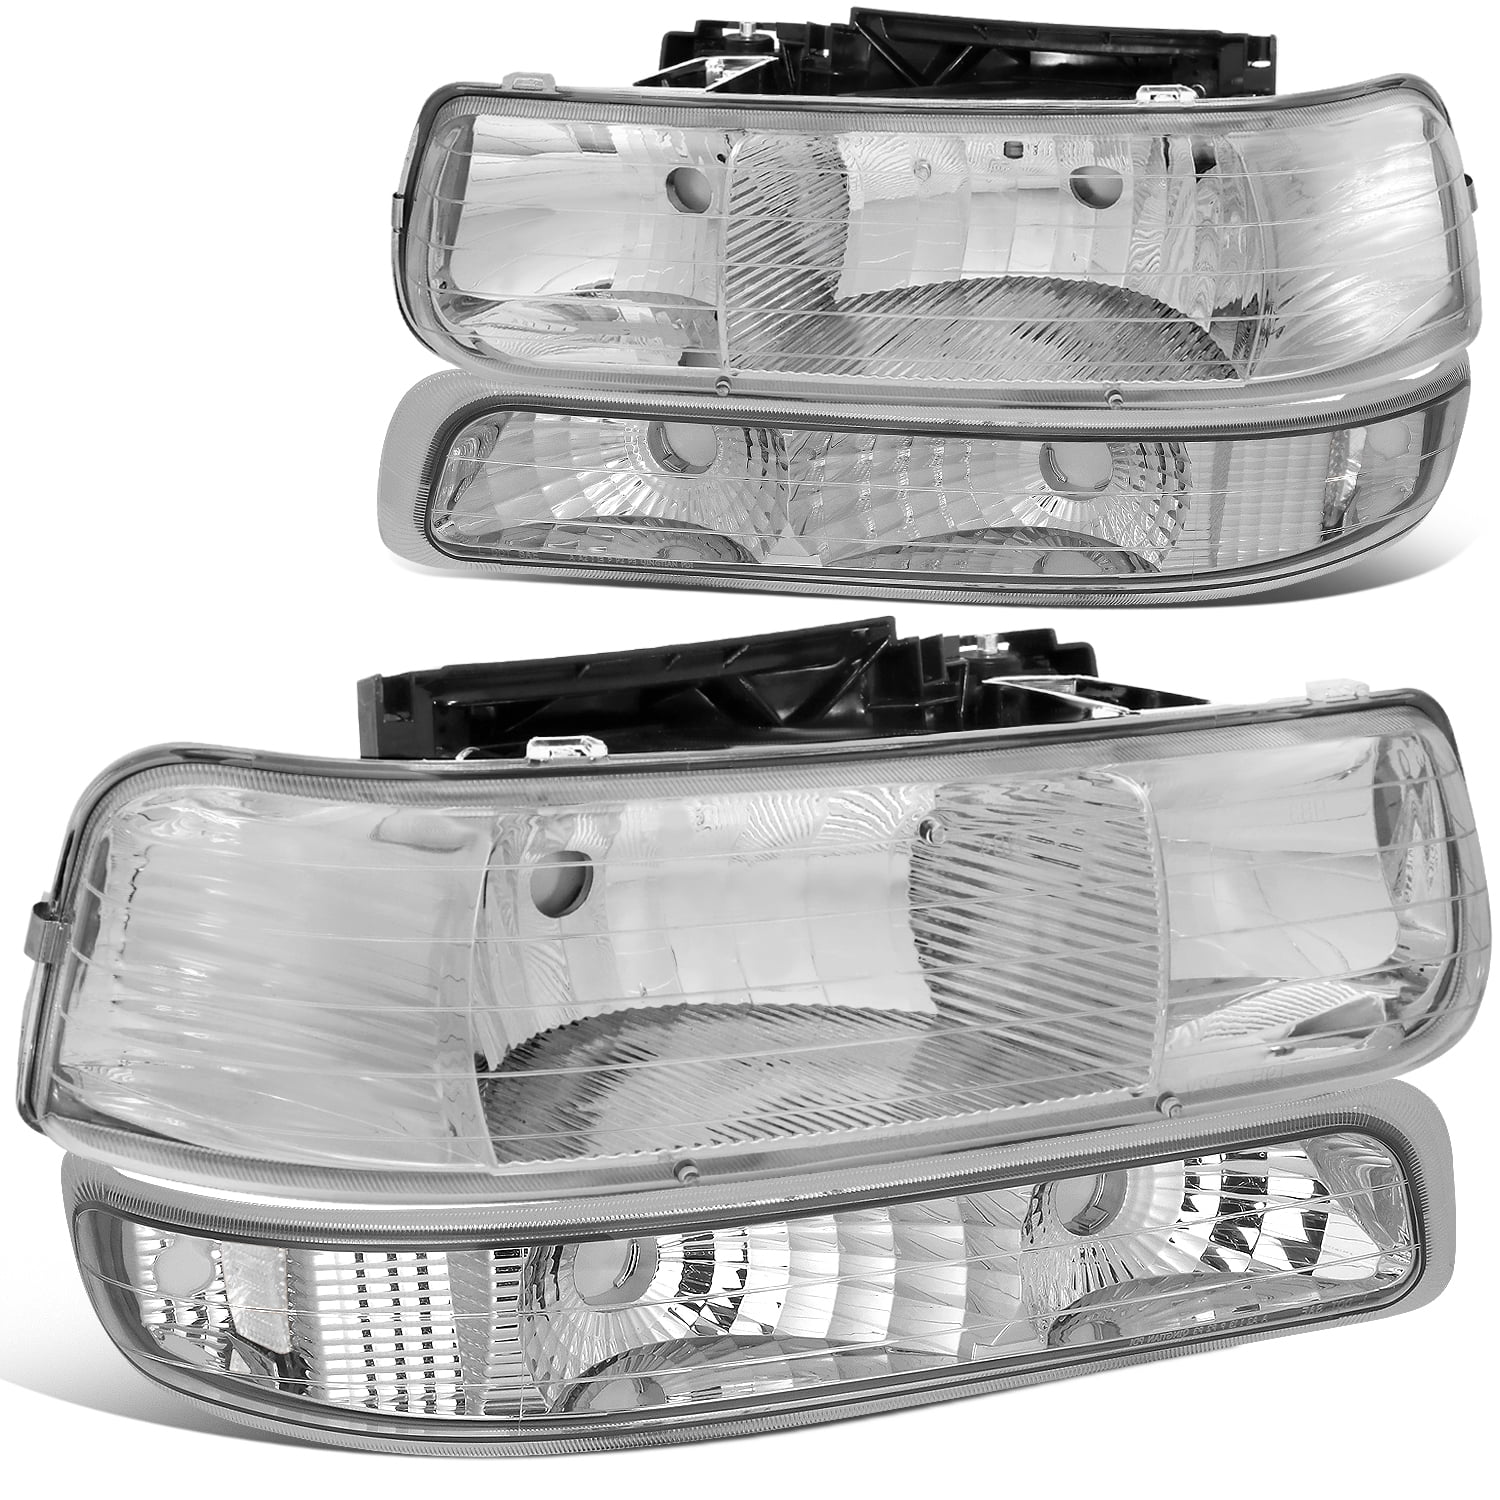 DNA Motoring HL-OH-CS99-4P-CH-CL1 For 1999 to 2006 Chevy Silverado Tahoe  4Pcs Headlight + Bumper Lamps Chrome Housing - GMT800 00 01 02 03 04 05  Left